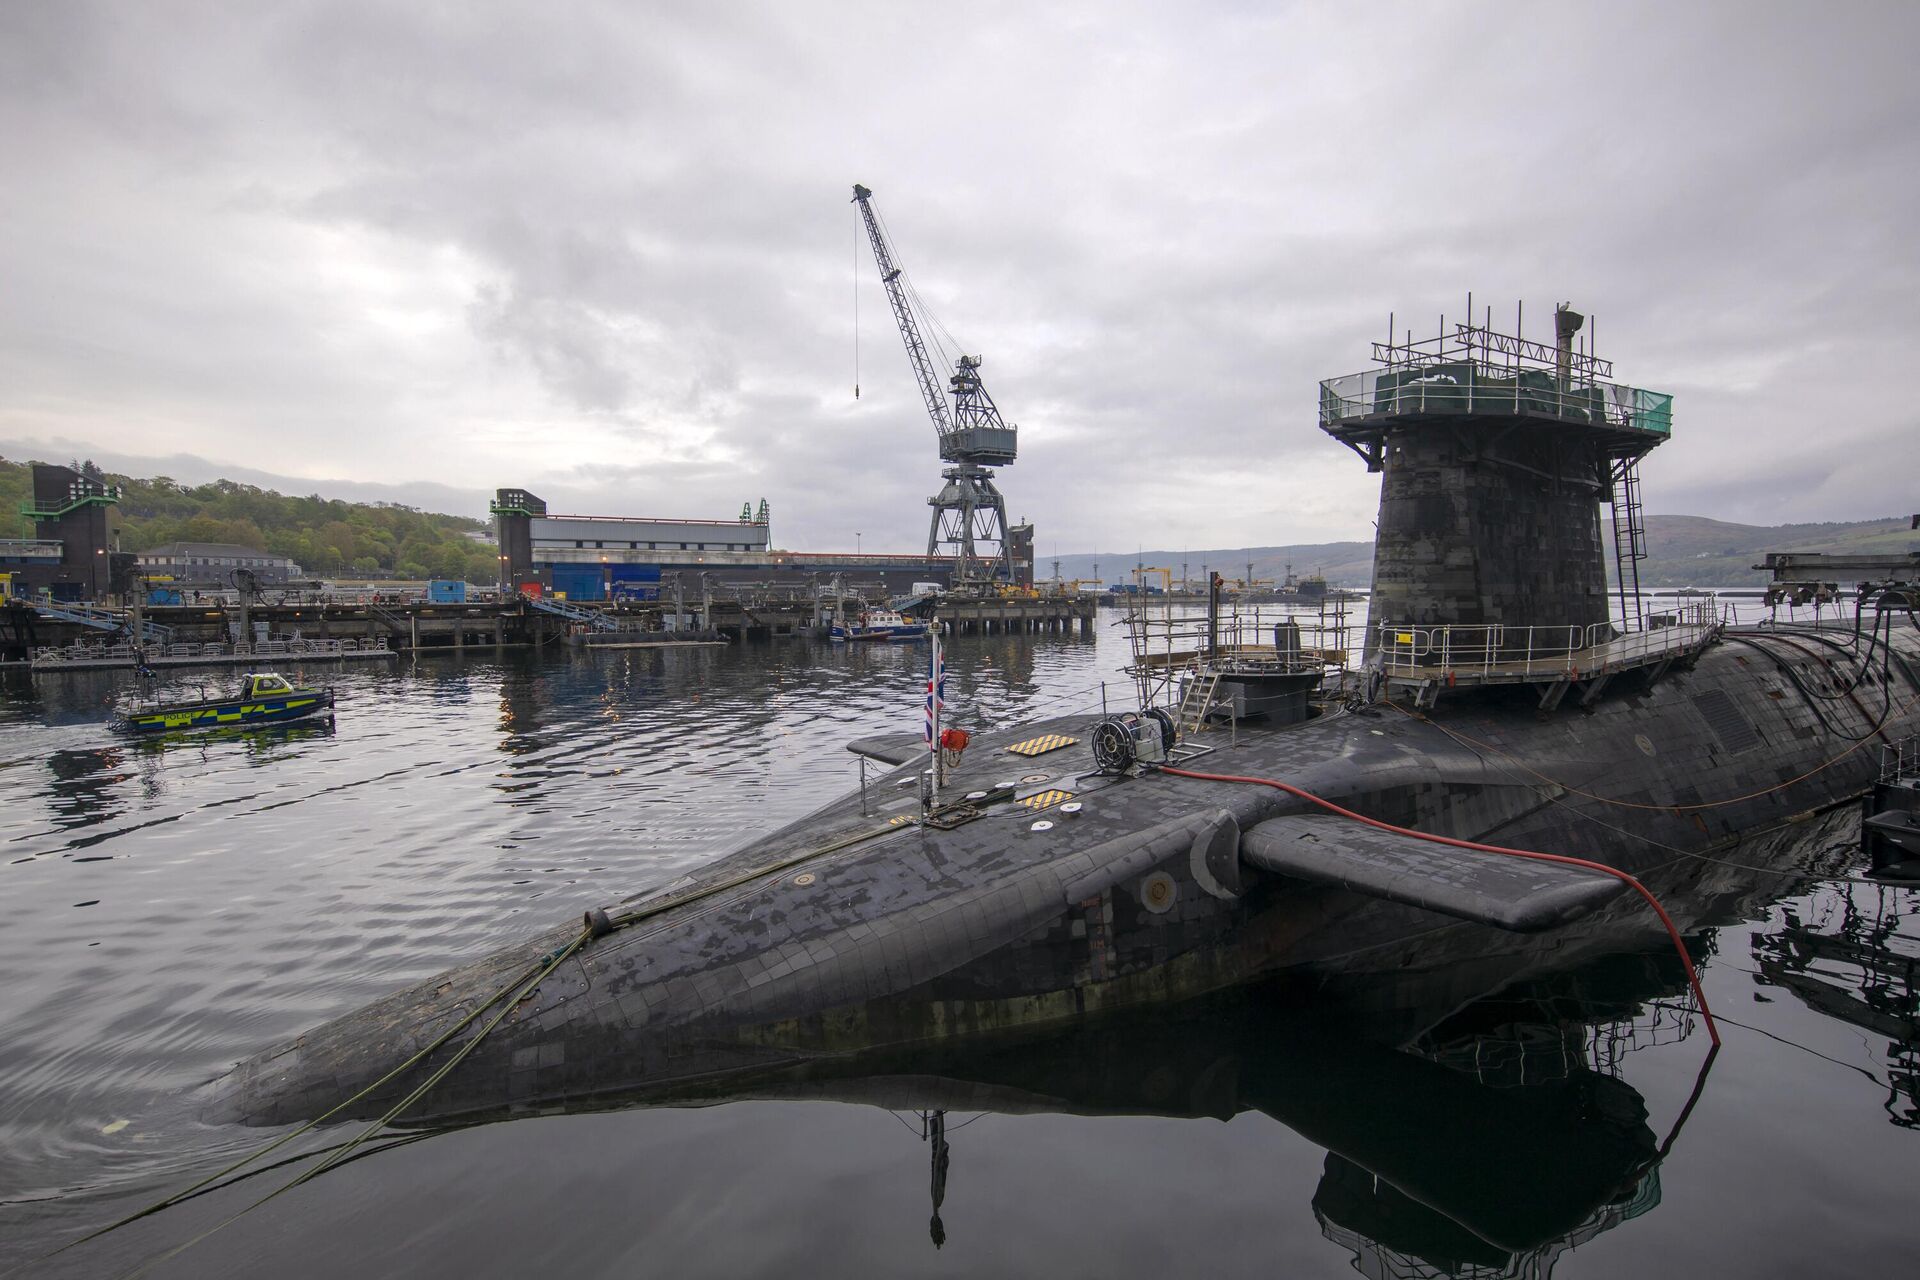 Vanguard-class submarine HMS Vigilant, one of the UK's four nuclear warhead-carrying submarines at HM Naval Base Clyde, Faslane, west of Glasgow, Scotland on April 29, 2019 - Sputnik International, 1920, 11.01.2023